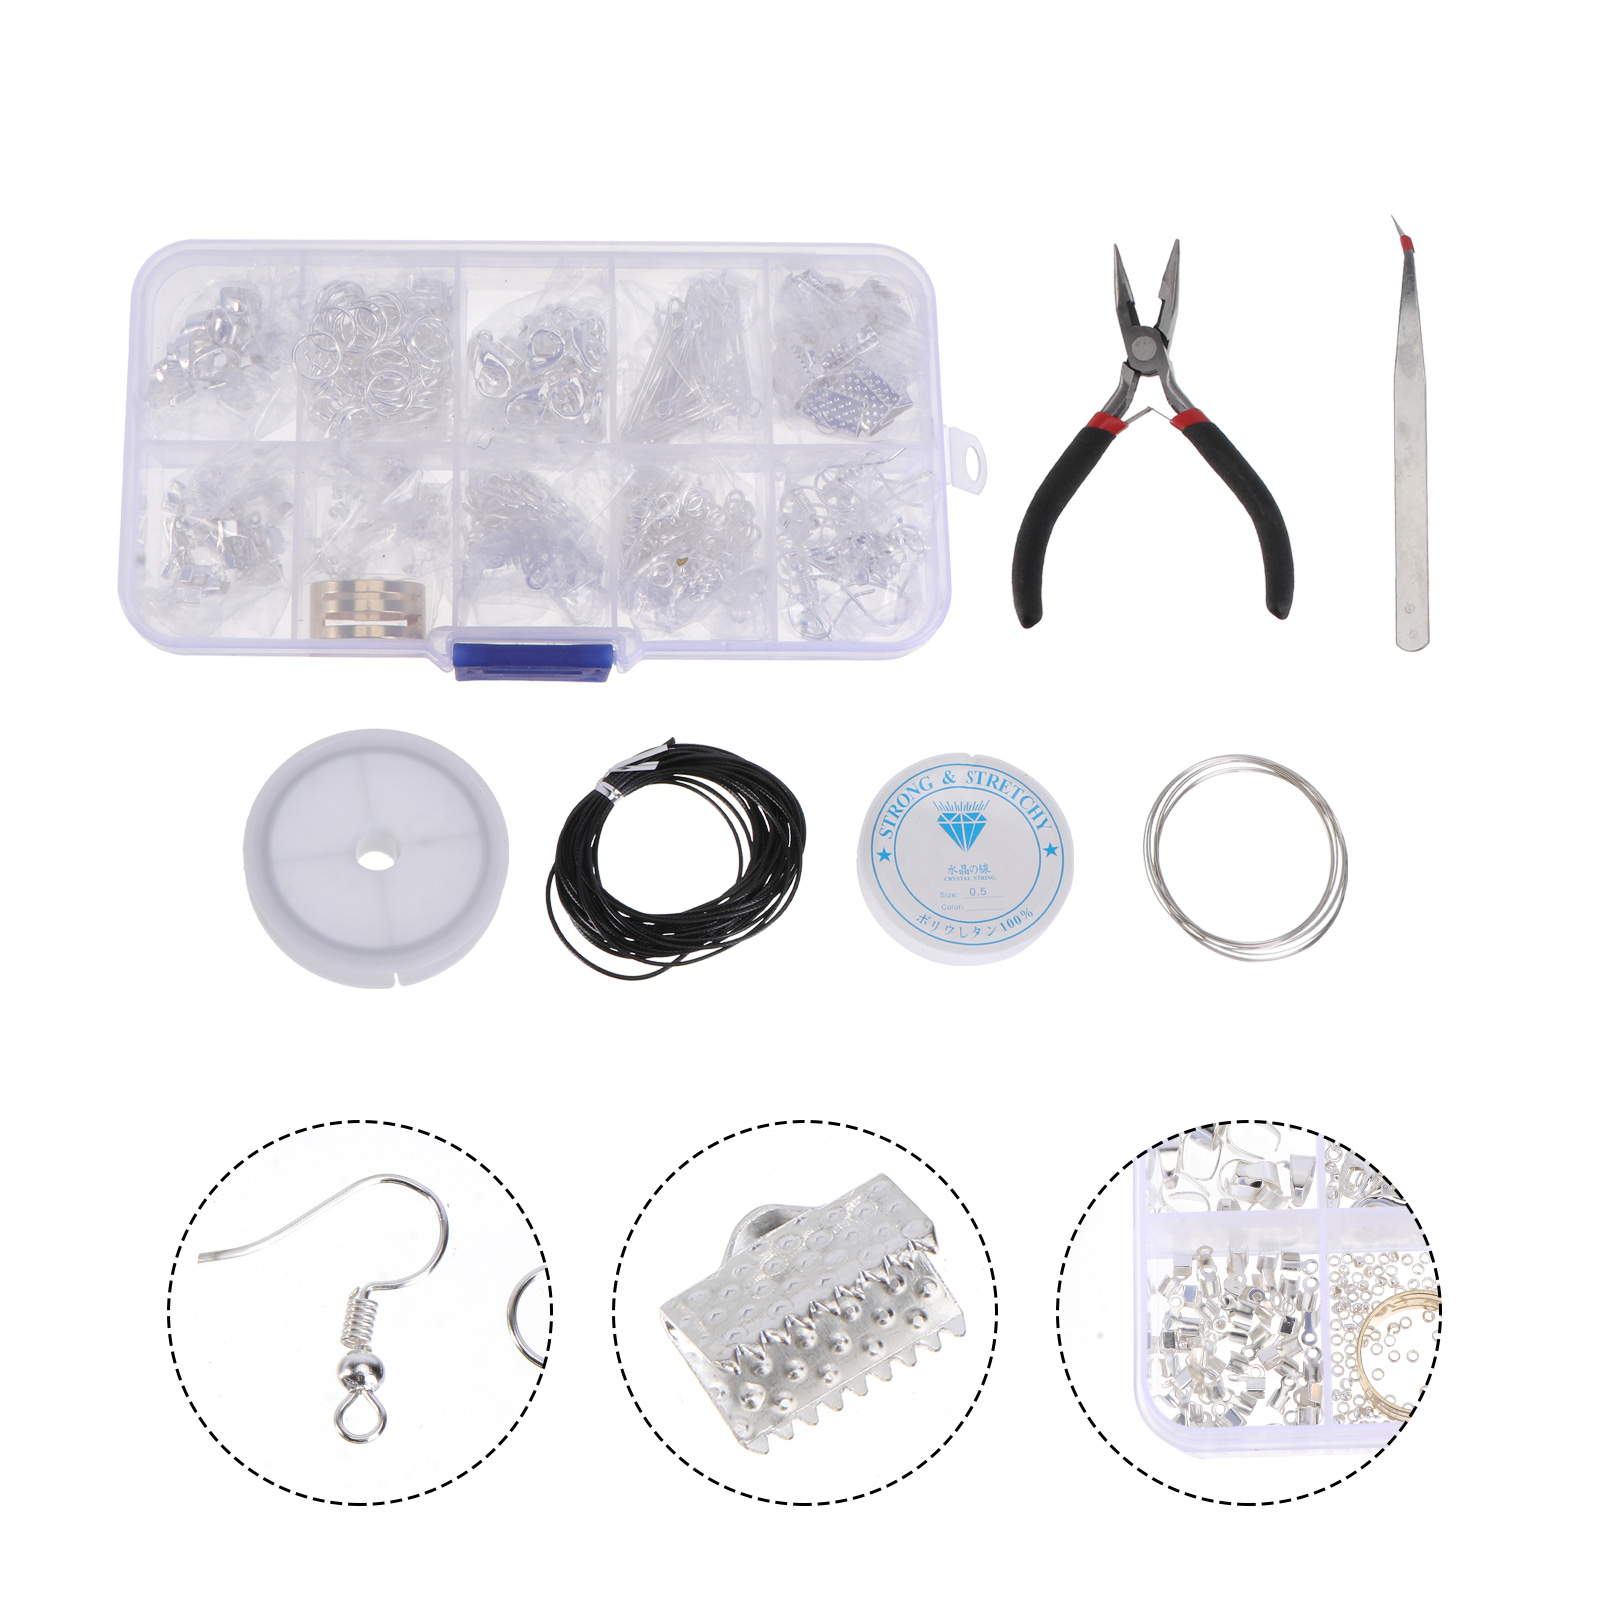 jewelry making kits for adults DIY Jewelry Making Tool Kit Supplies Kit  Jewelry Repair Tools With Accessories 